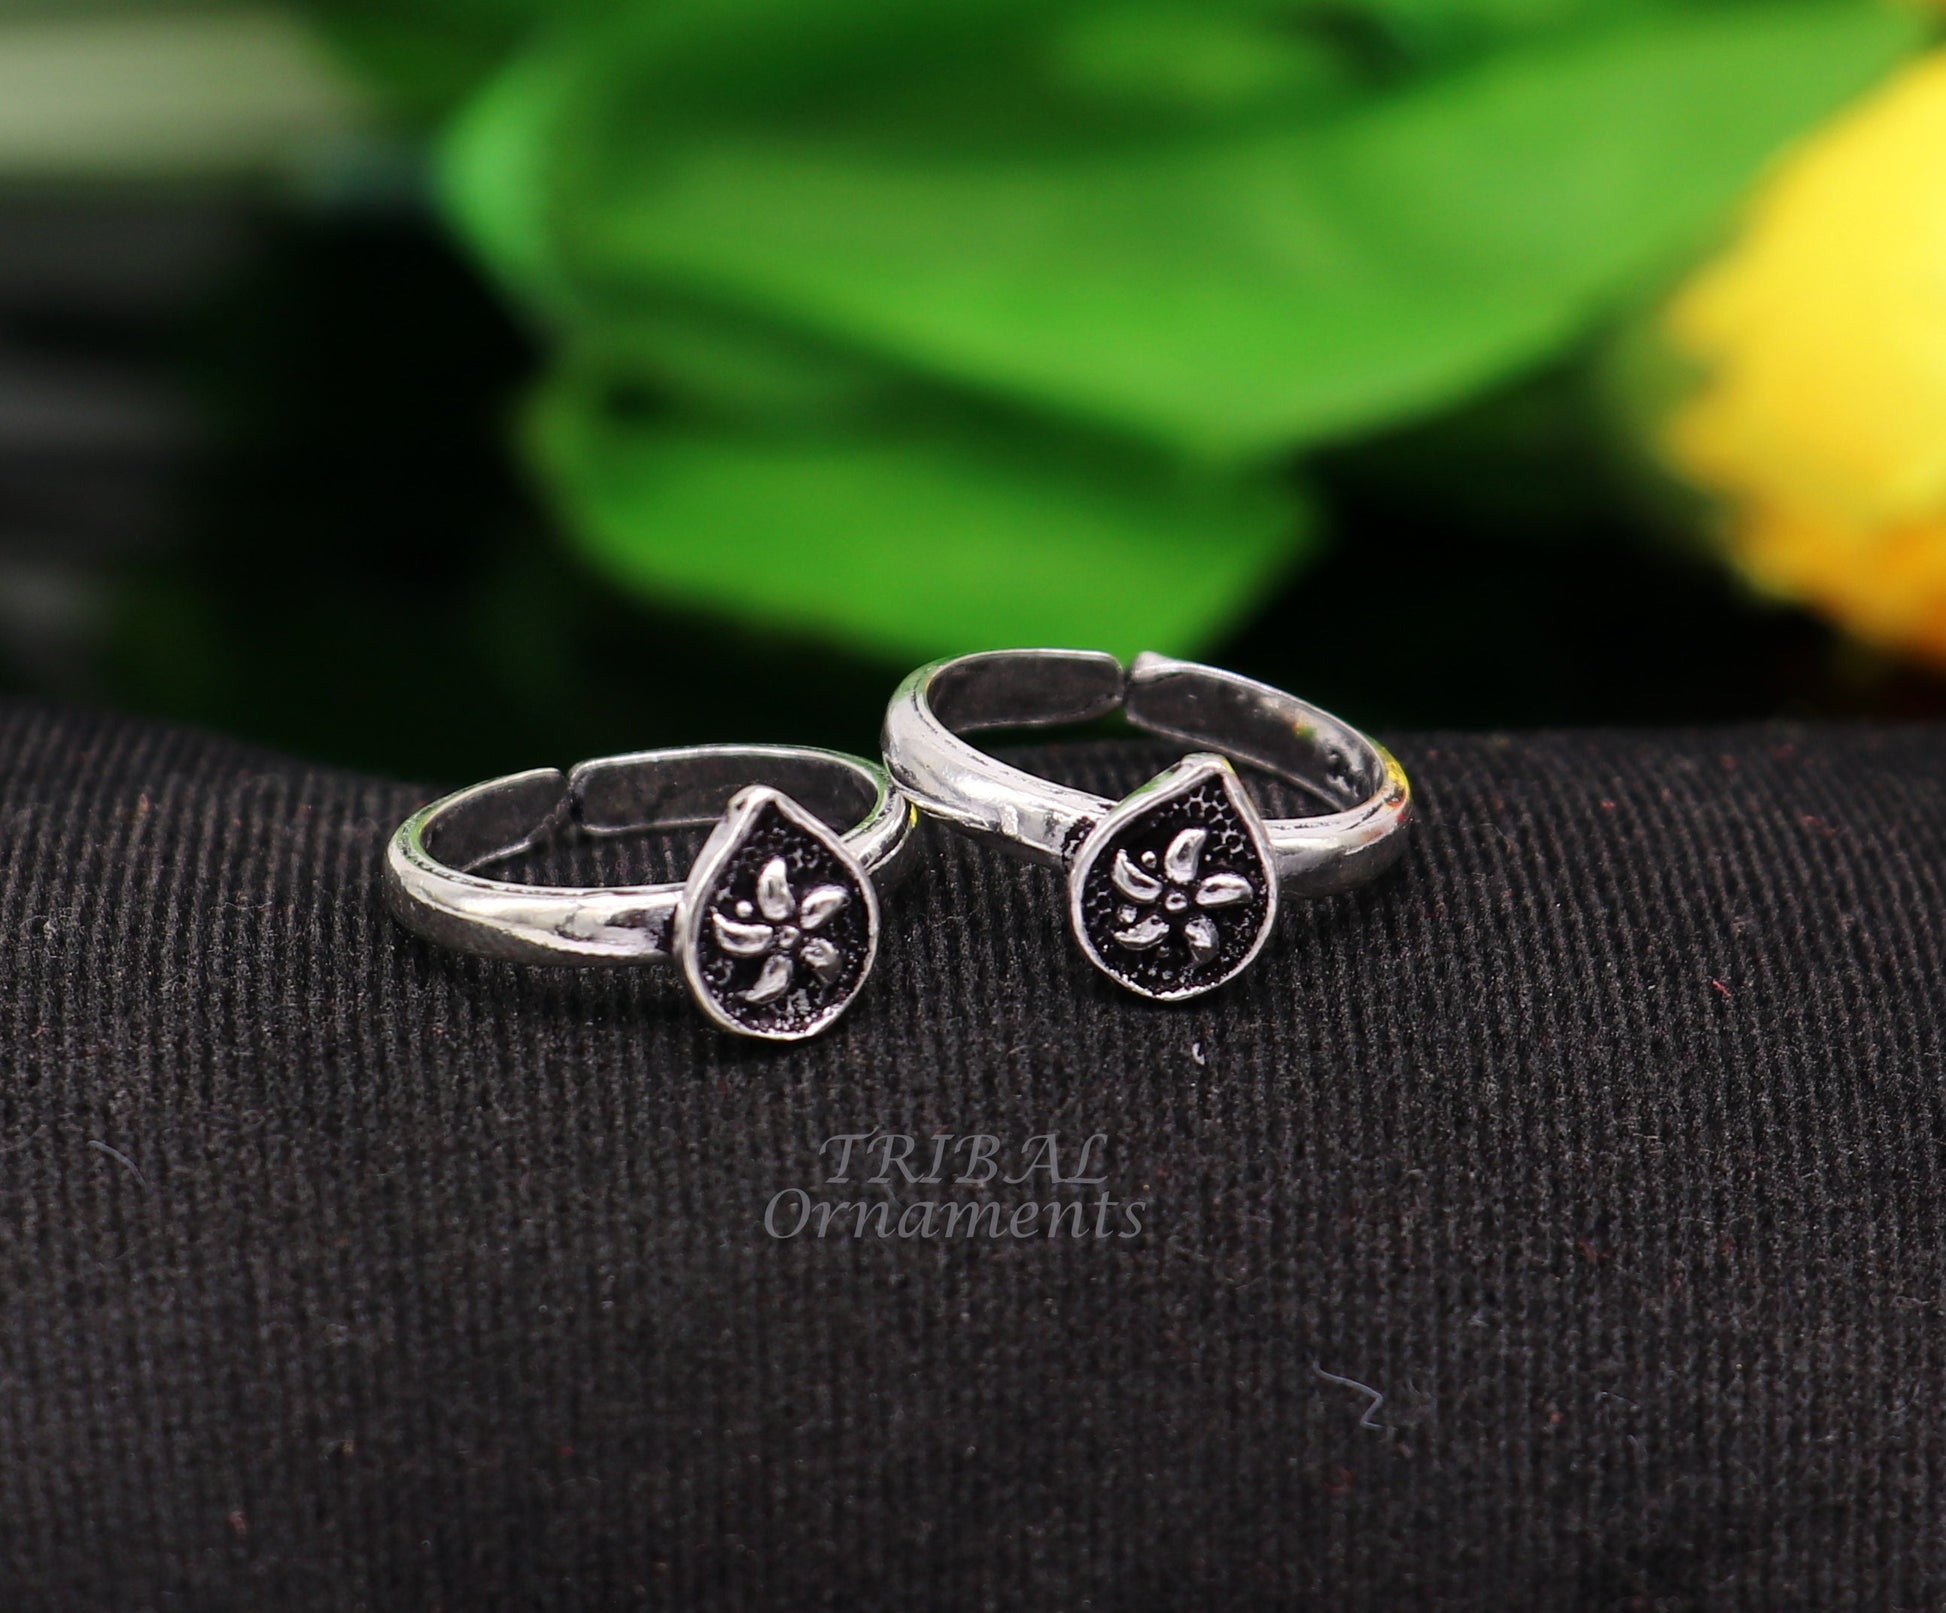 925 sterling silver handmade unique classical floral design vintage tribal ethnic toe ring best brides gifting jewelry ytr71 - TRIBAL ORNAMENTS